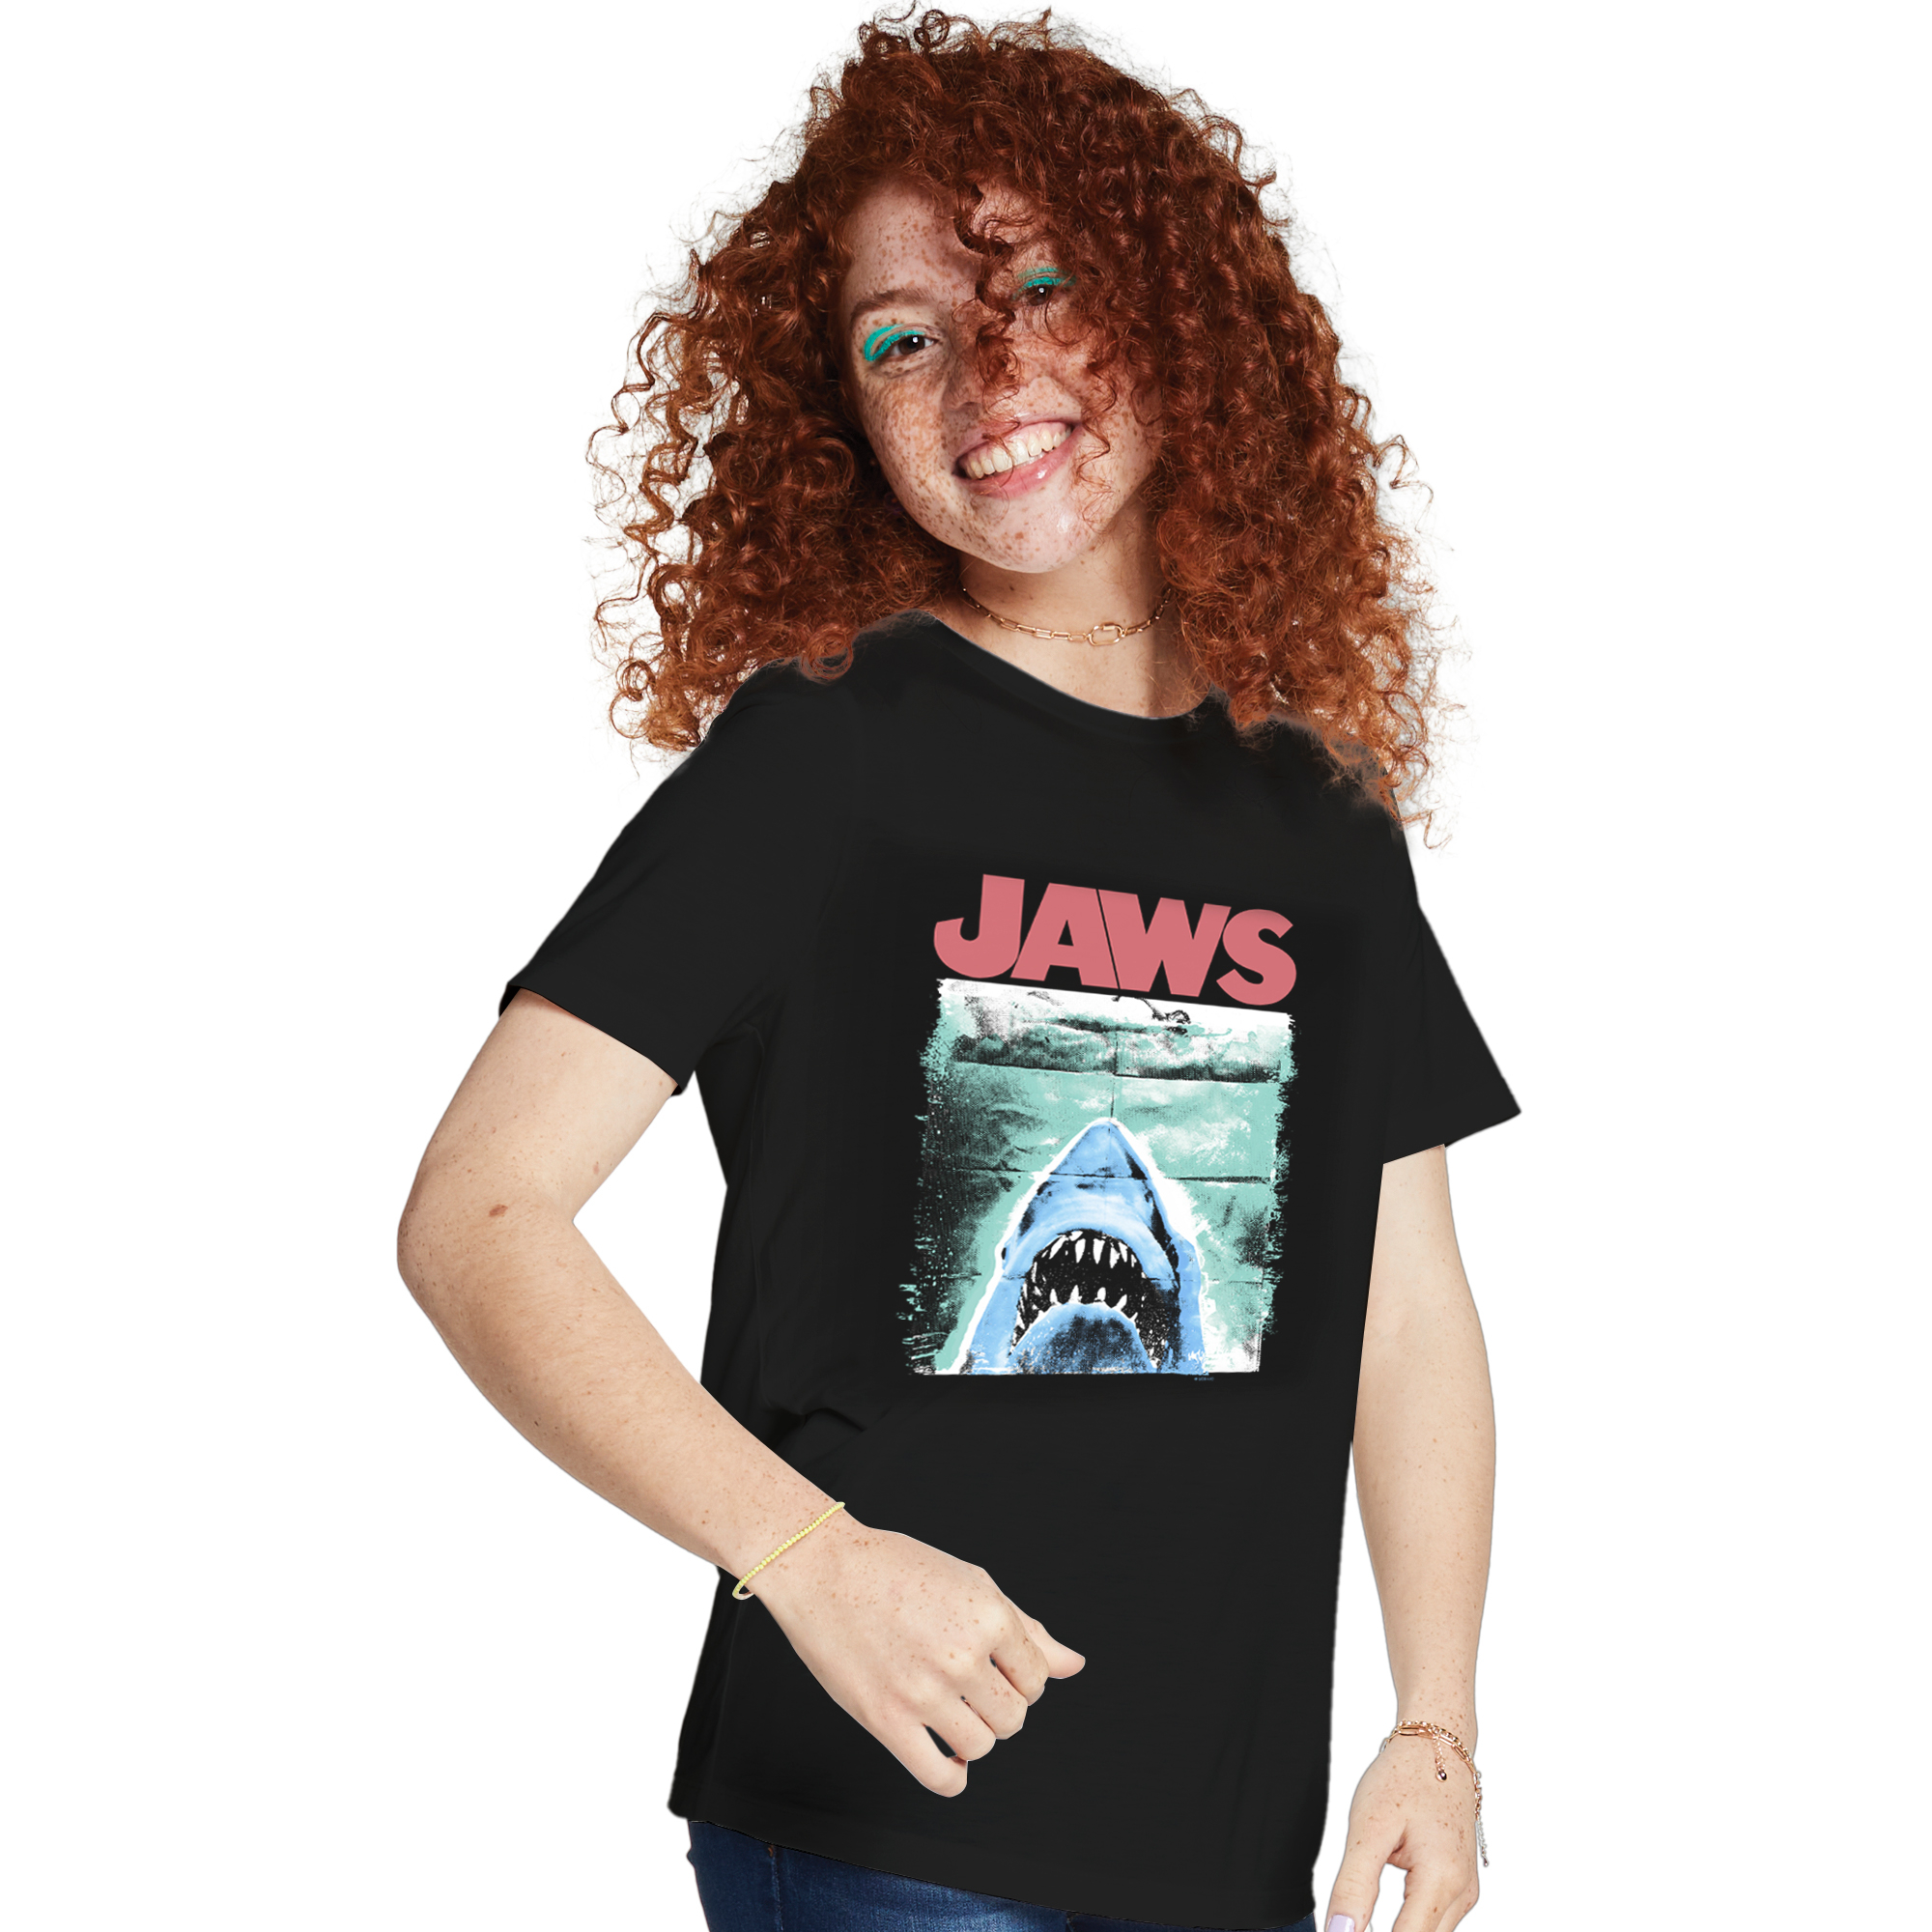 jaws™ movie poster graphic tee